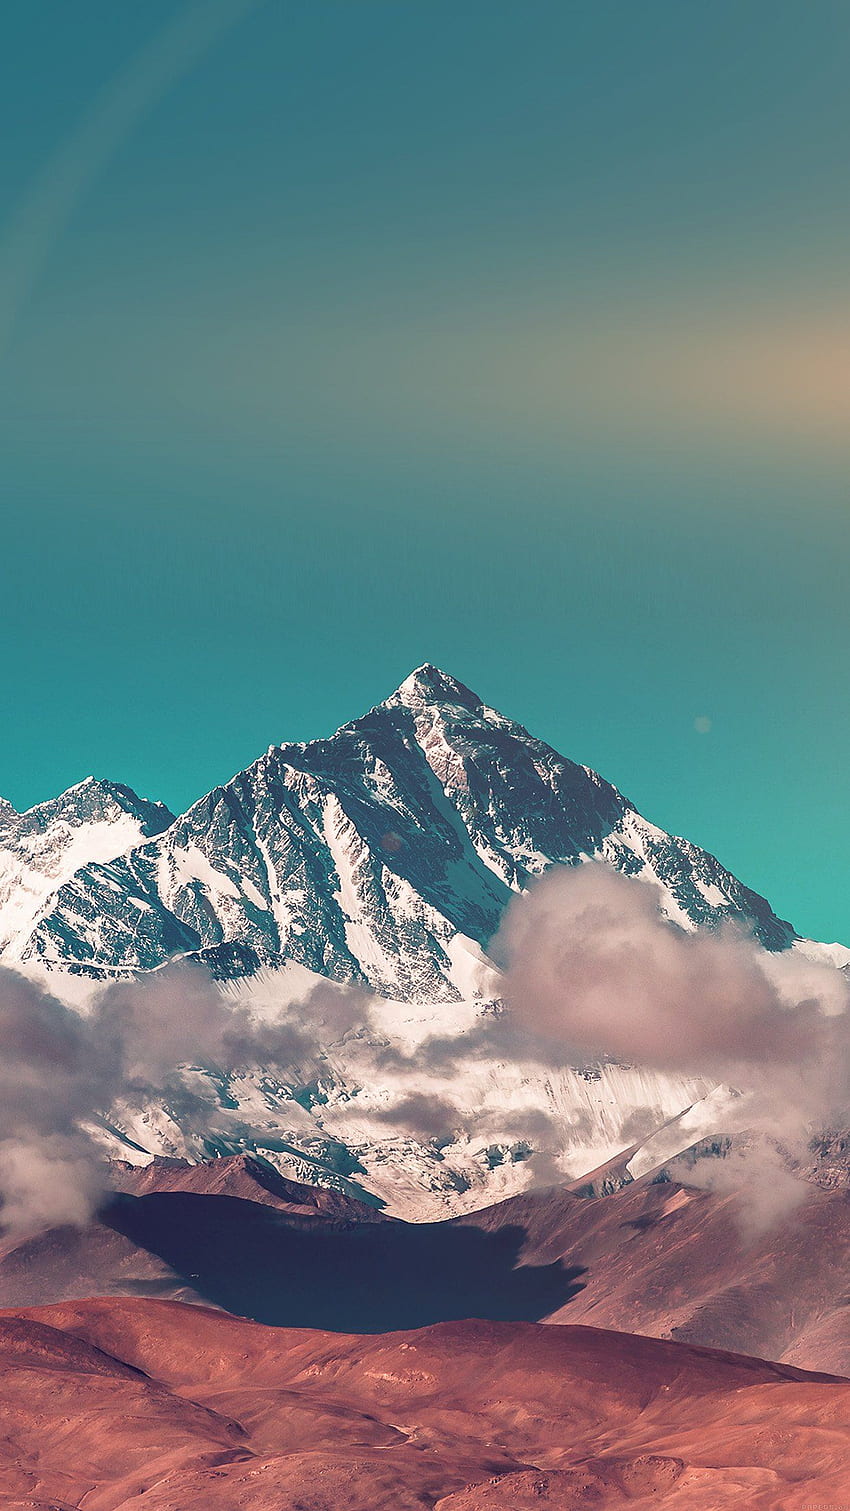 I love my so much that I decided to share it with ya'll. Maybe one of you will like it to :) : GalaxyS9, Love Mountain HD phone wallpaper